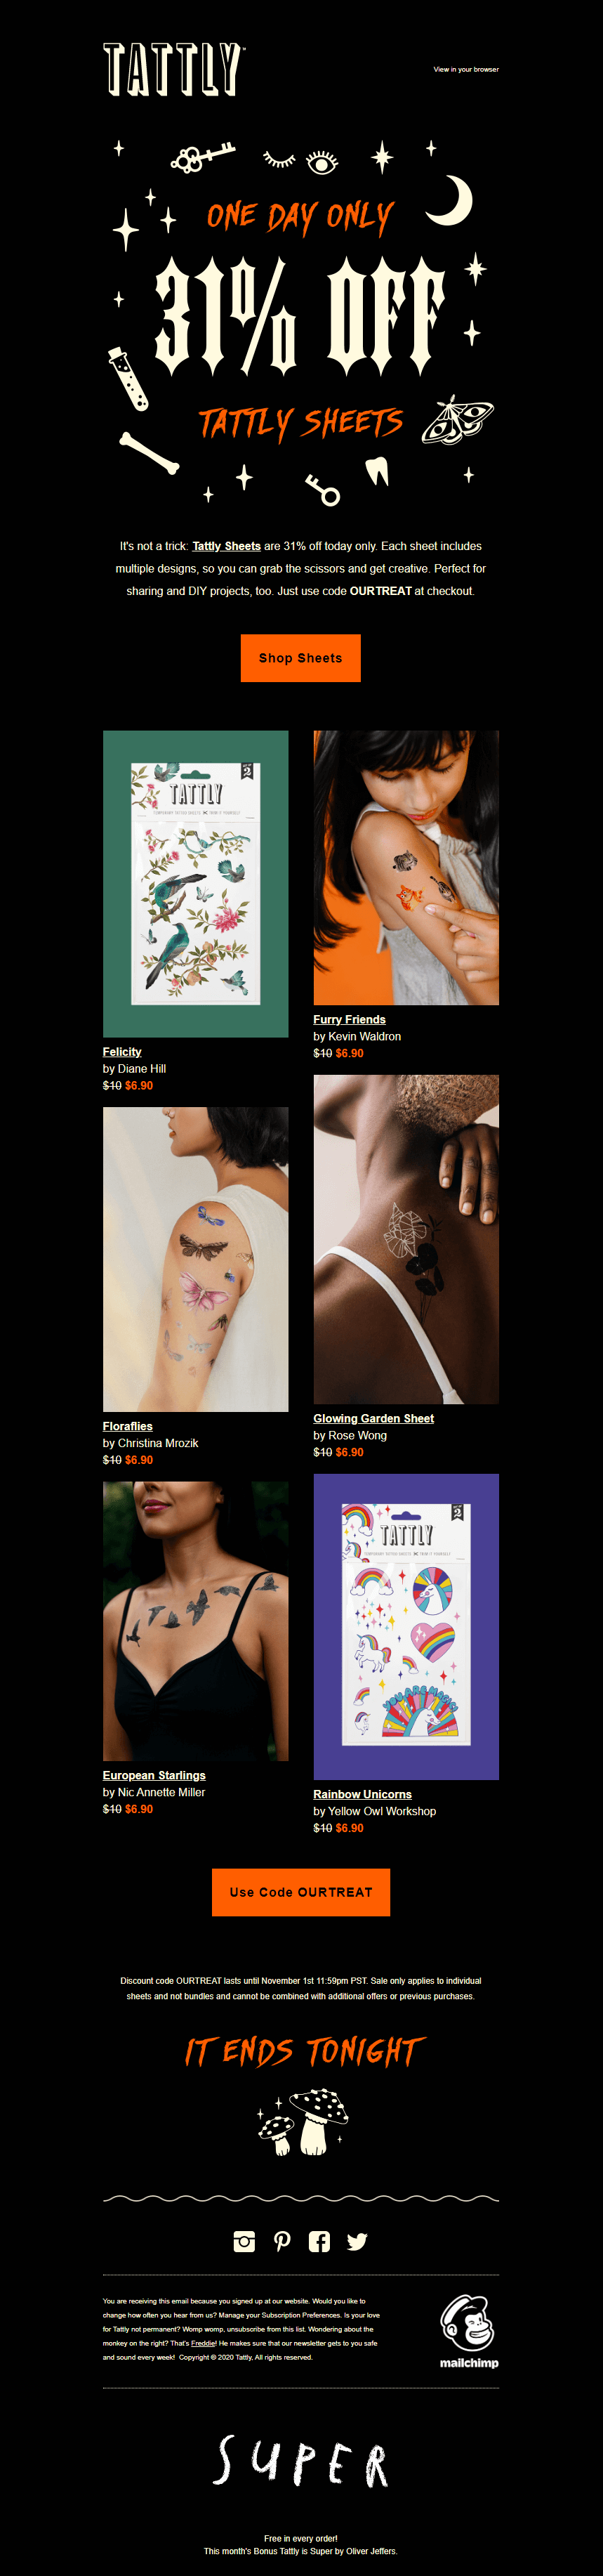 Tattly Halloween discount 31% off email